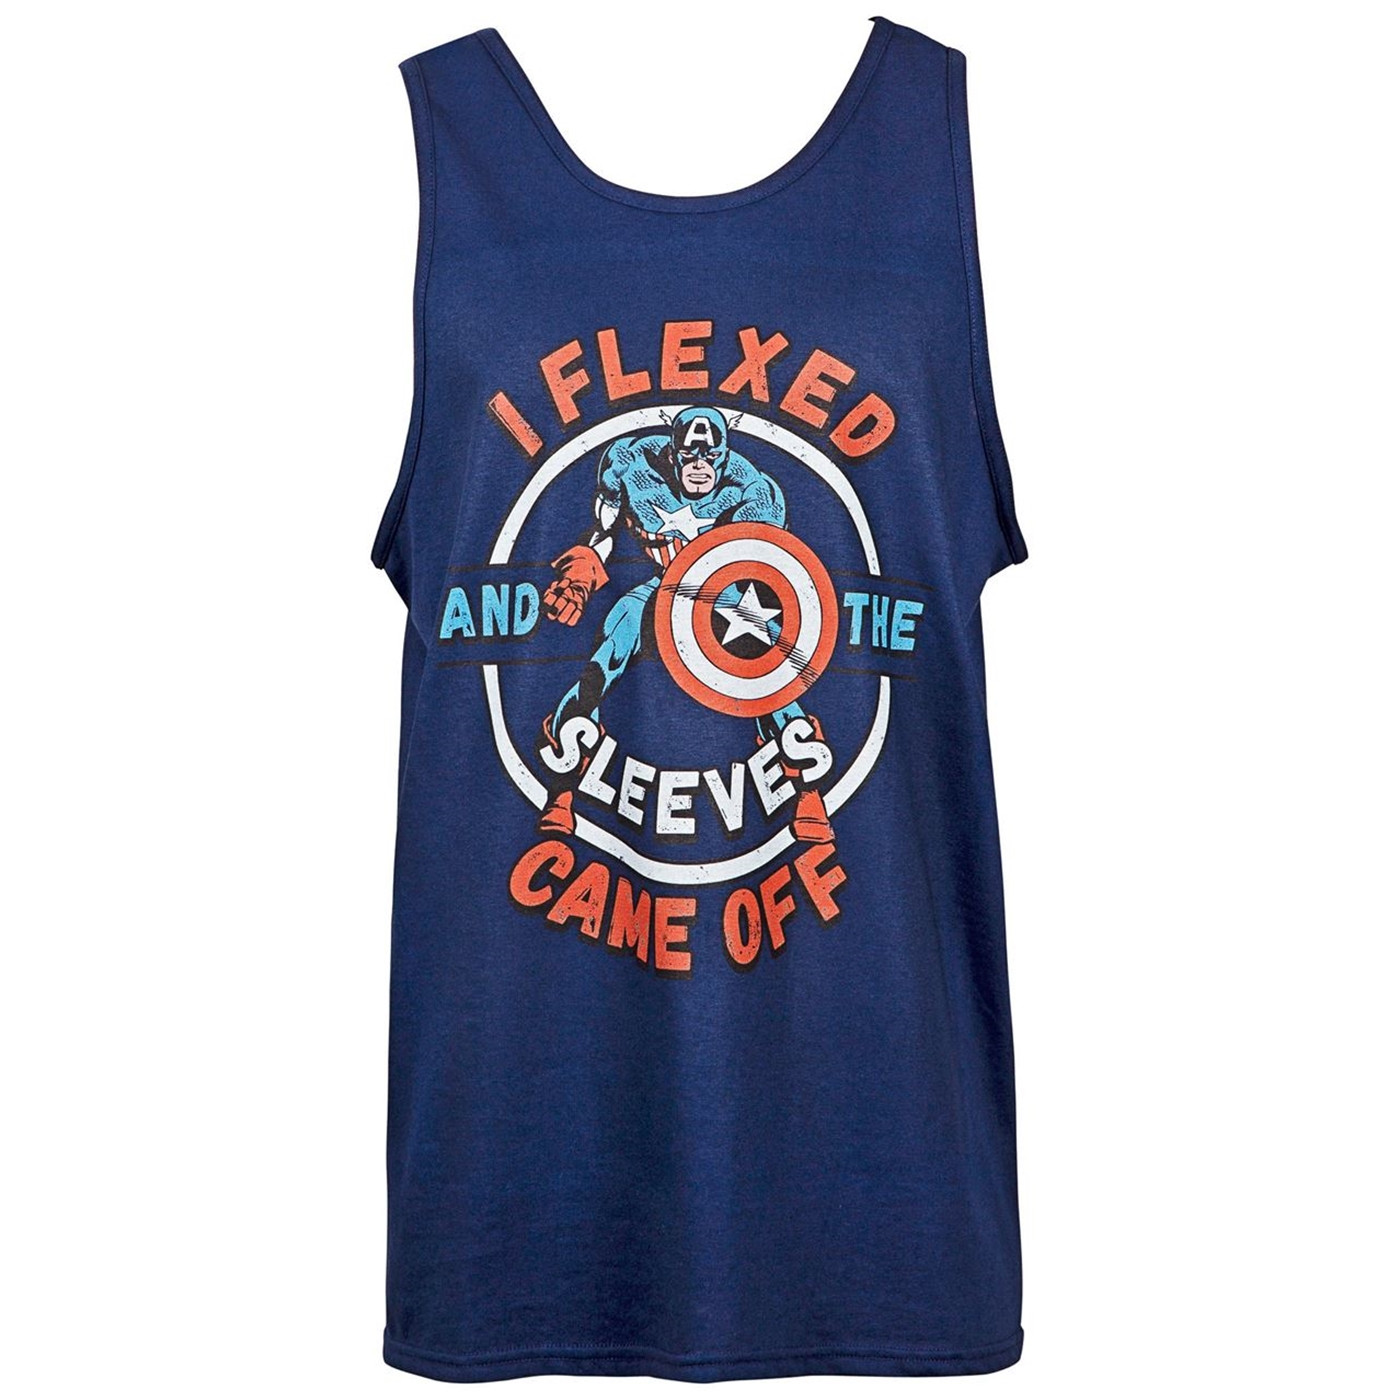 Captain America Flexed off the Sleeves Tank Top